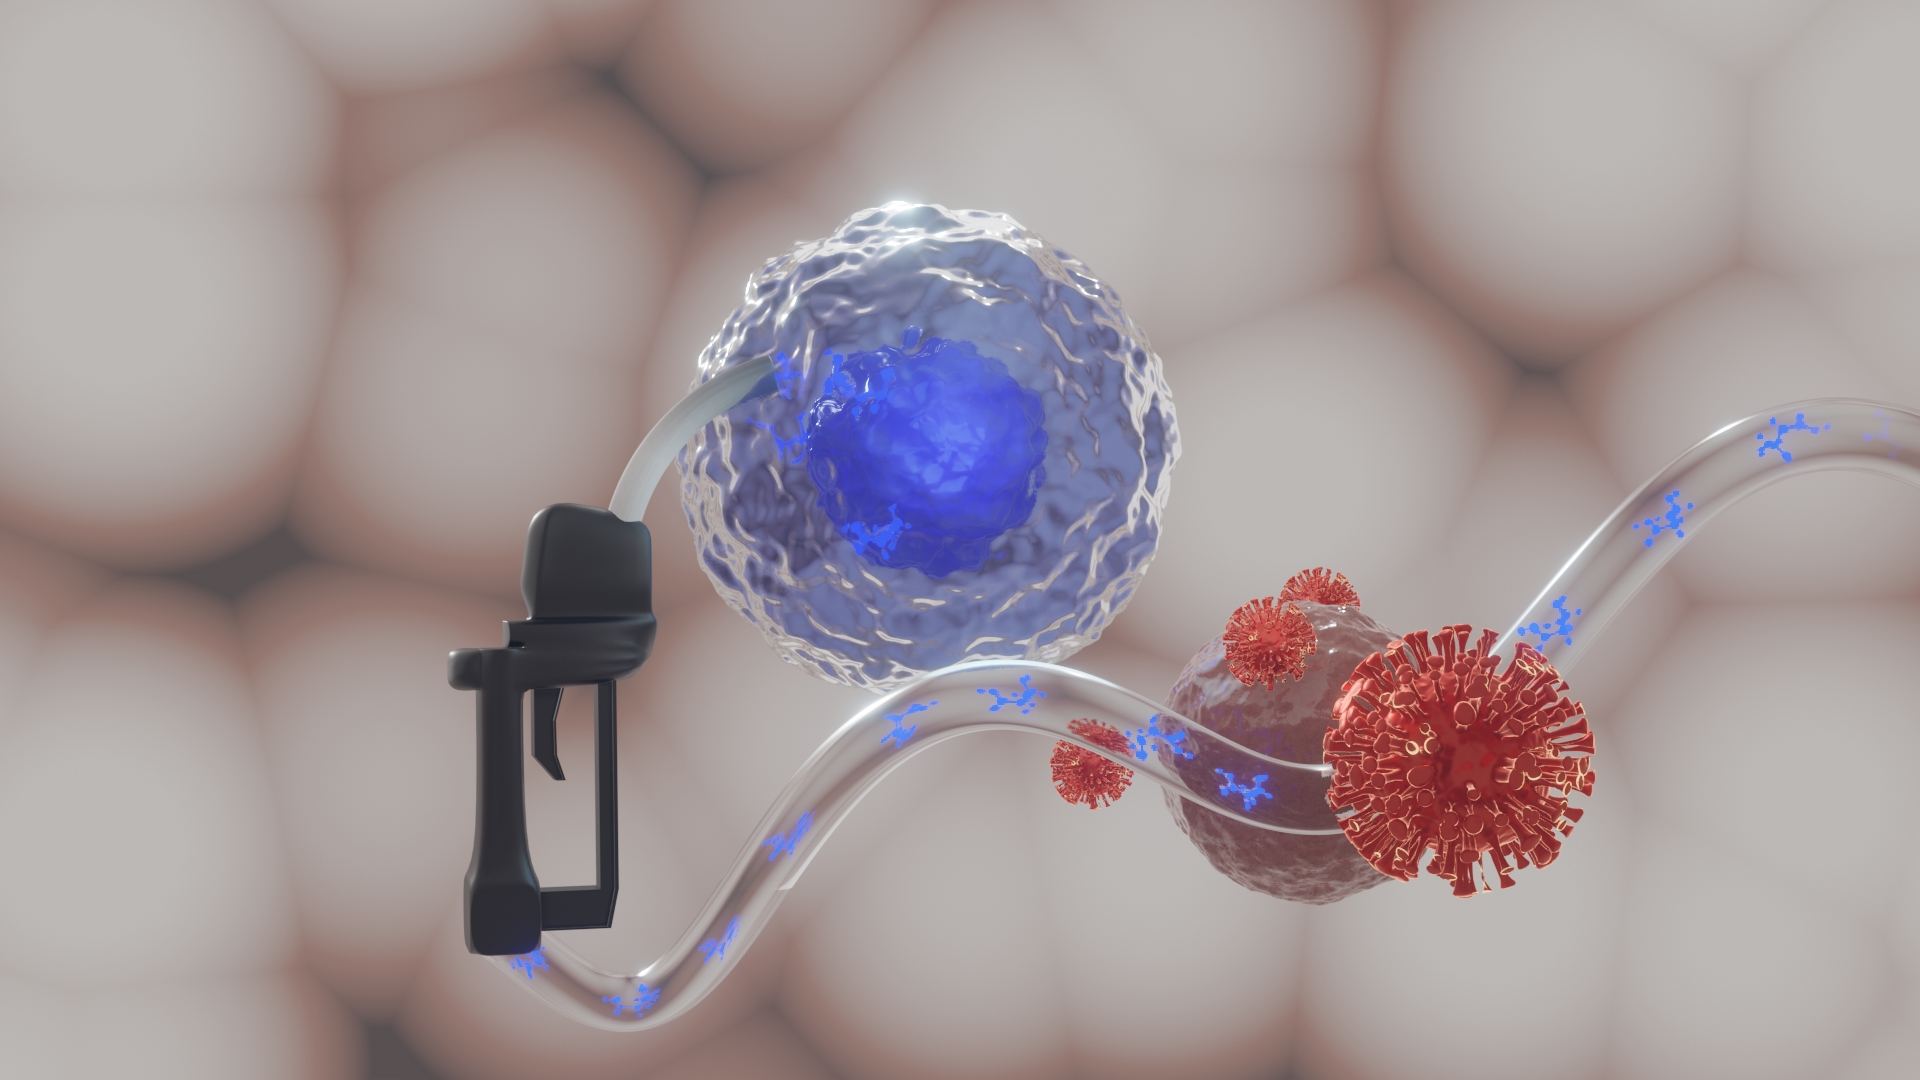 Illustration - When T cells (blue-white sphere) fill up with energy in the form of ketone bodies (blue), they can fight viruses more effectively.